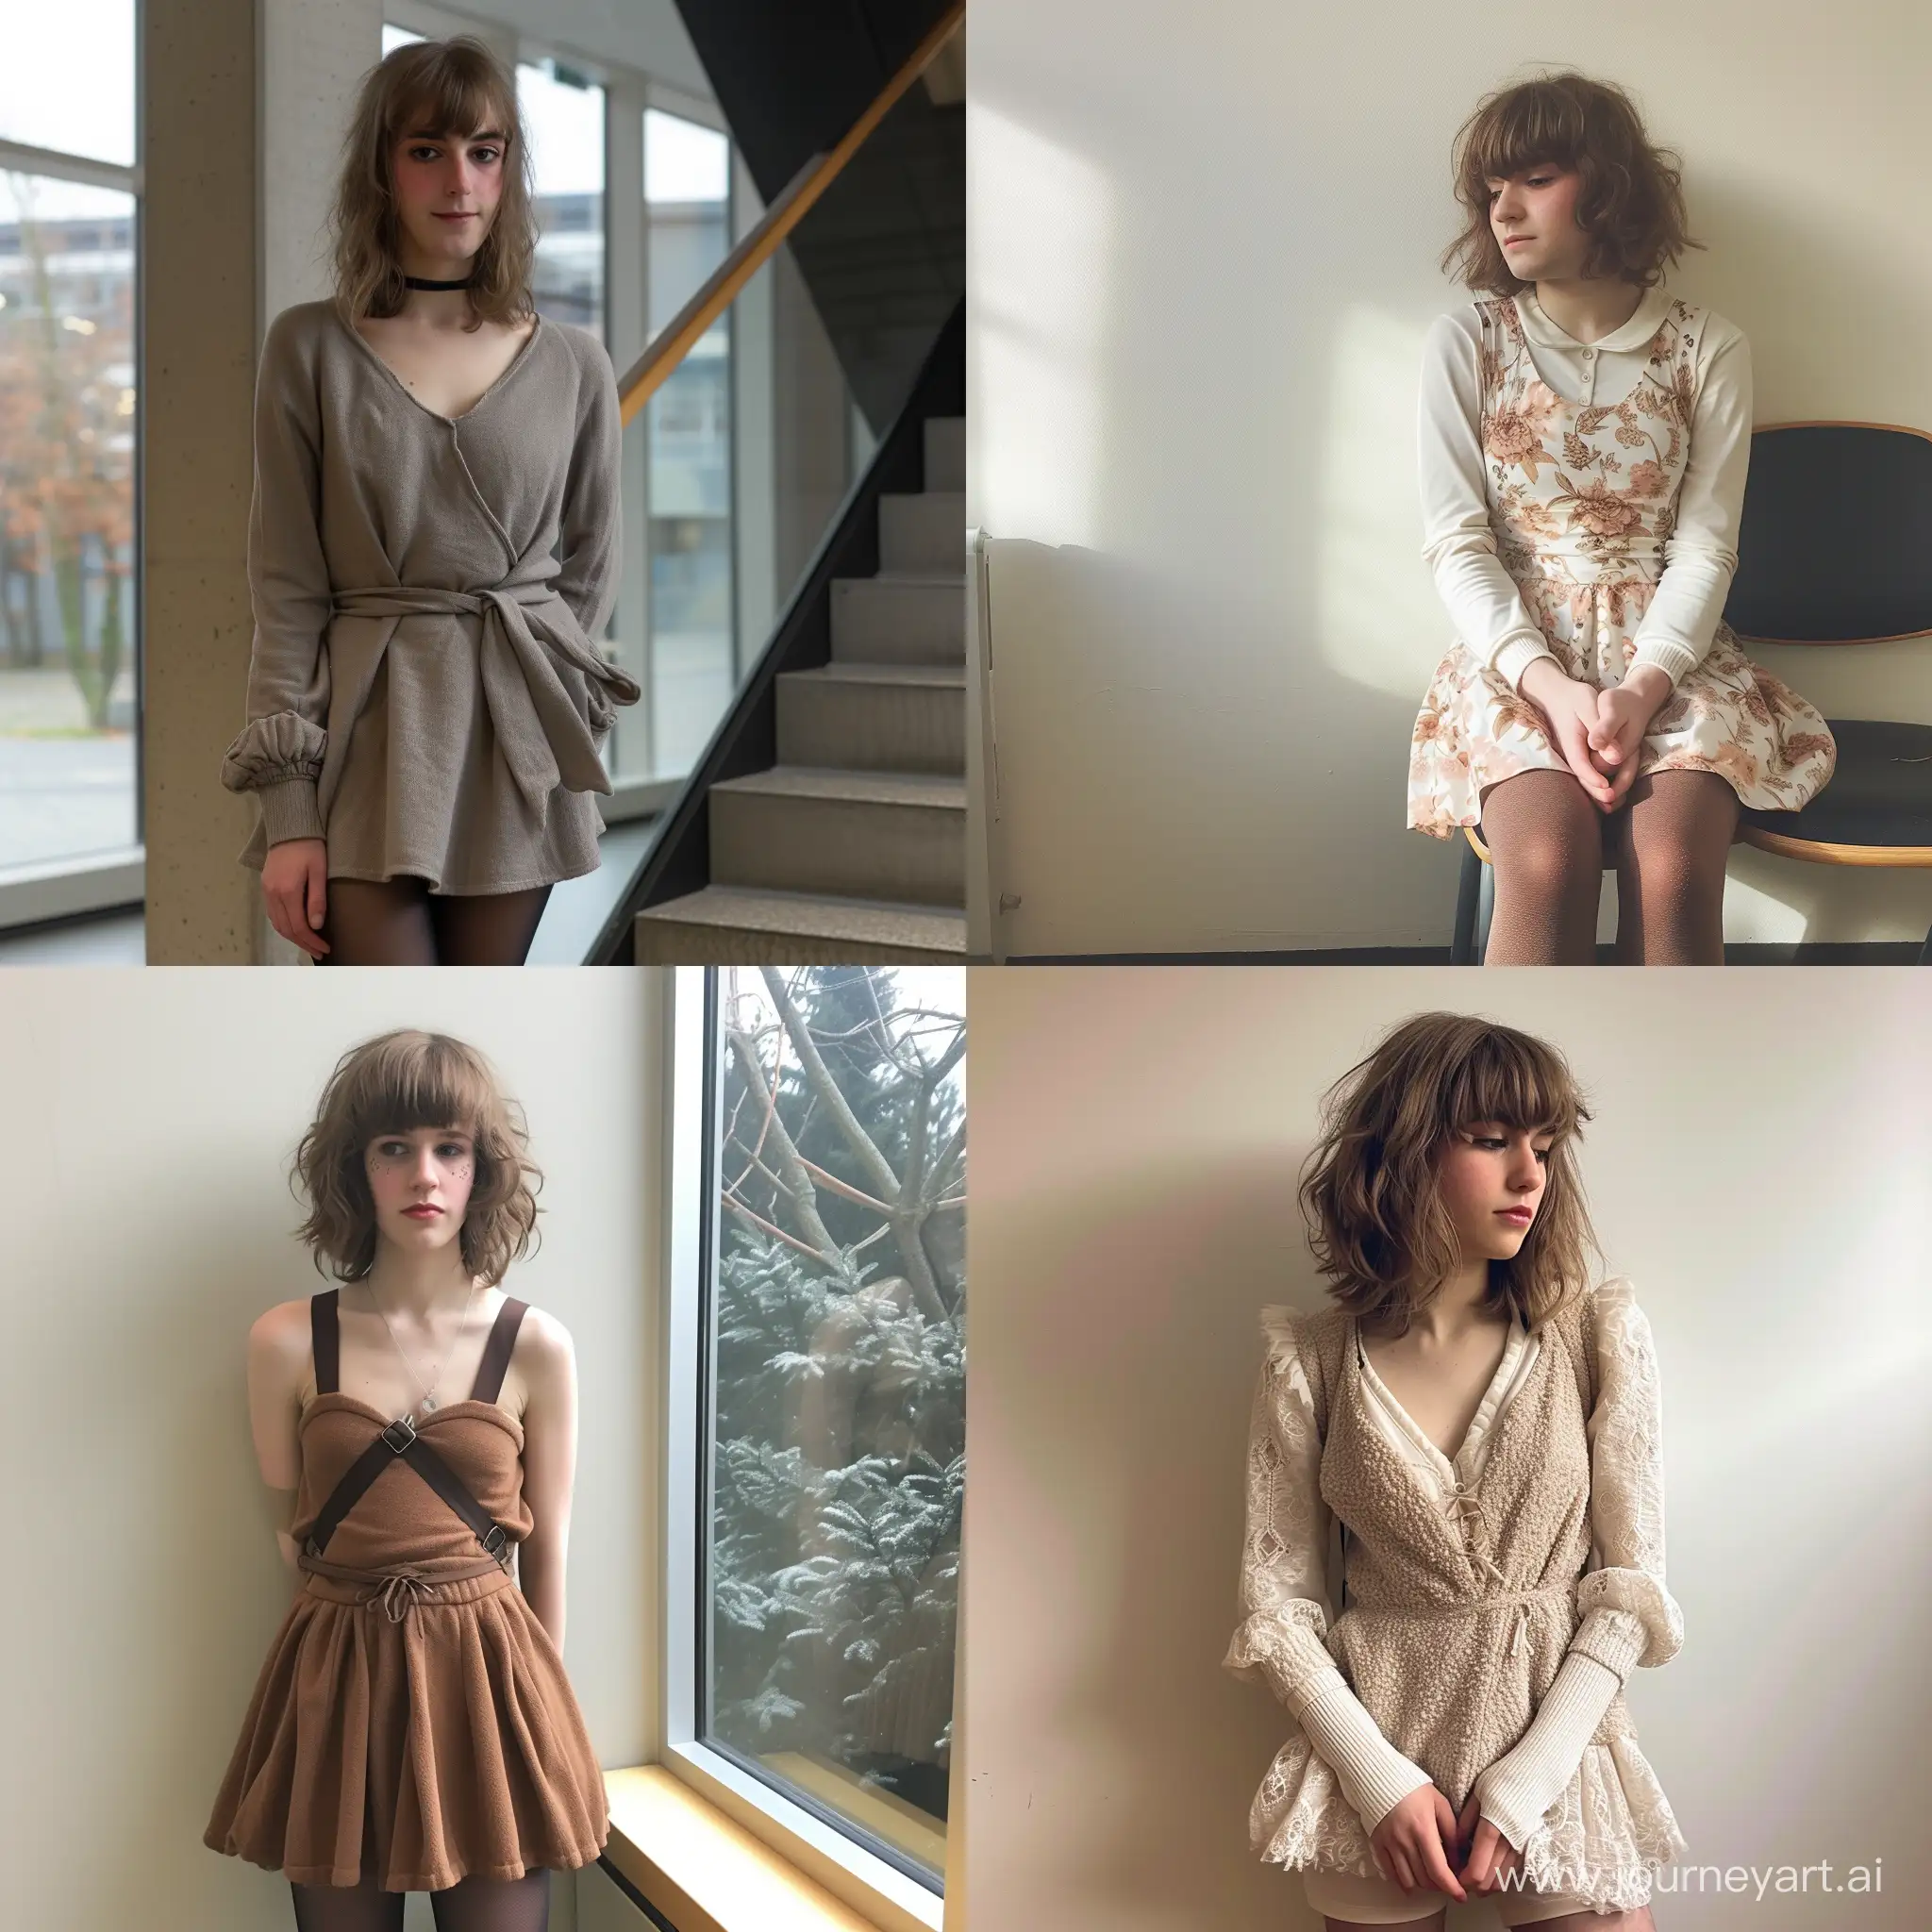 transgender girl in school, outfit contains cozy dress and tights, little makeup, looks shy